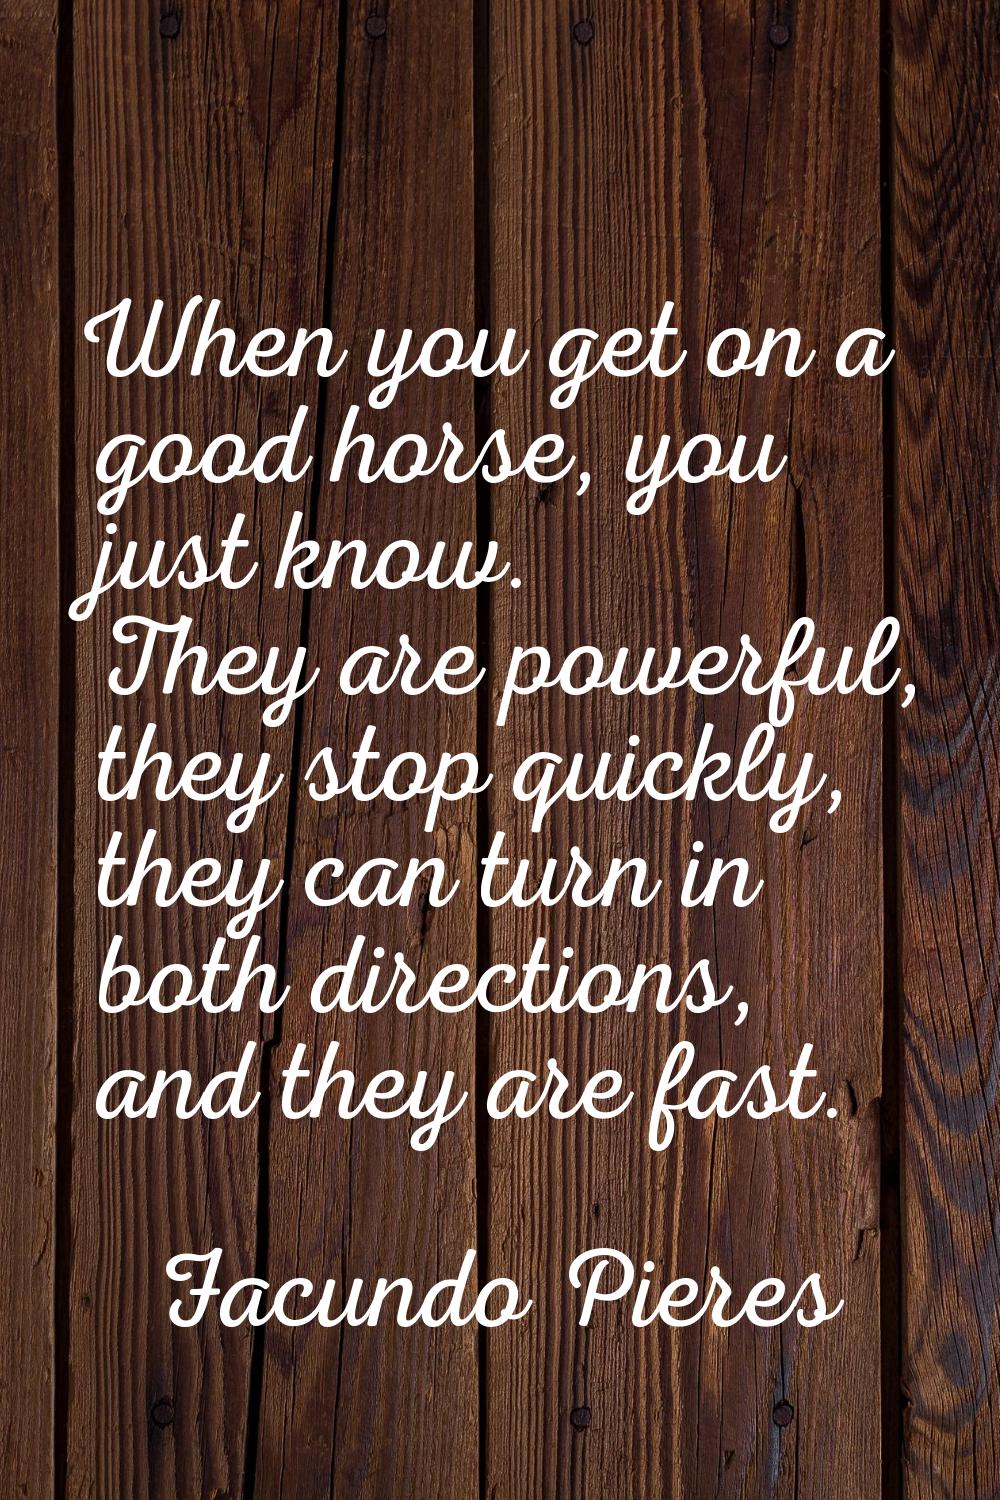 When you get on a good horse, you just know. They are powerful, they stop quickly, they can turn in